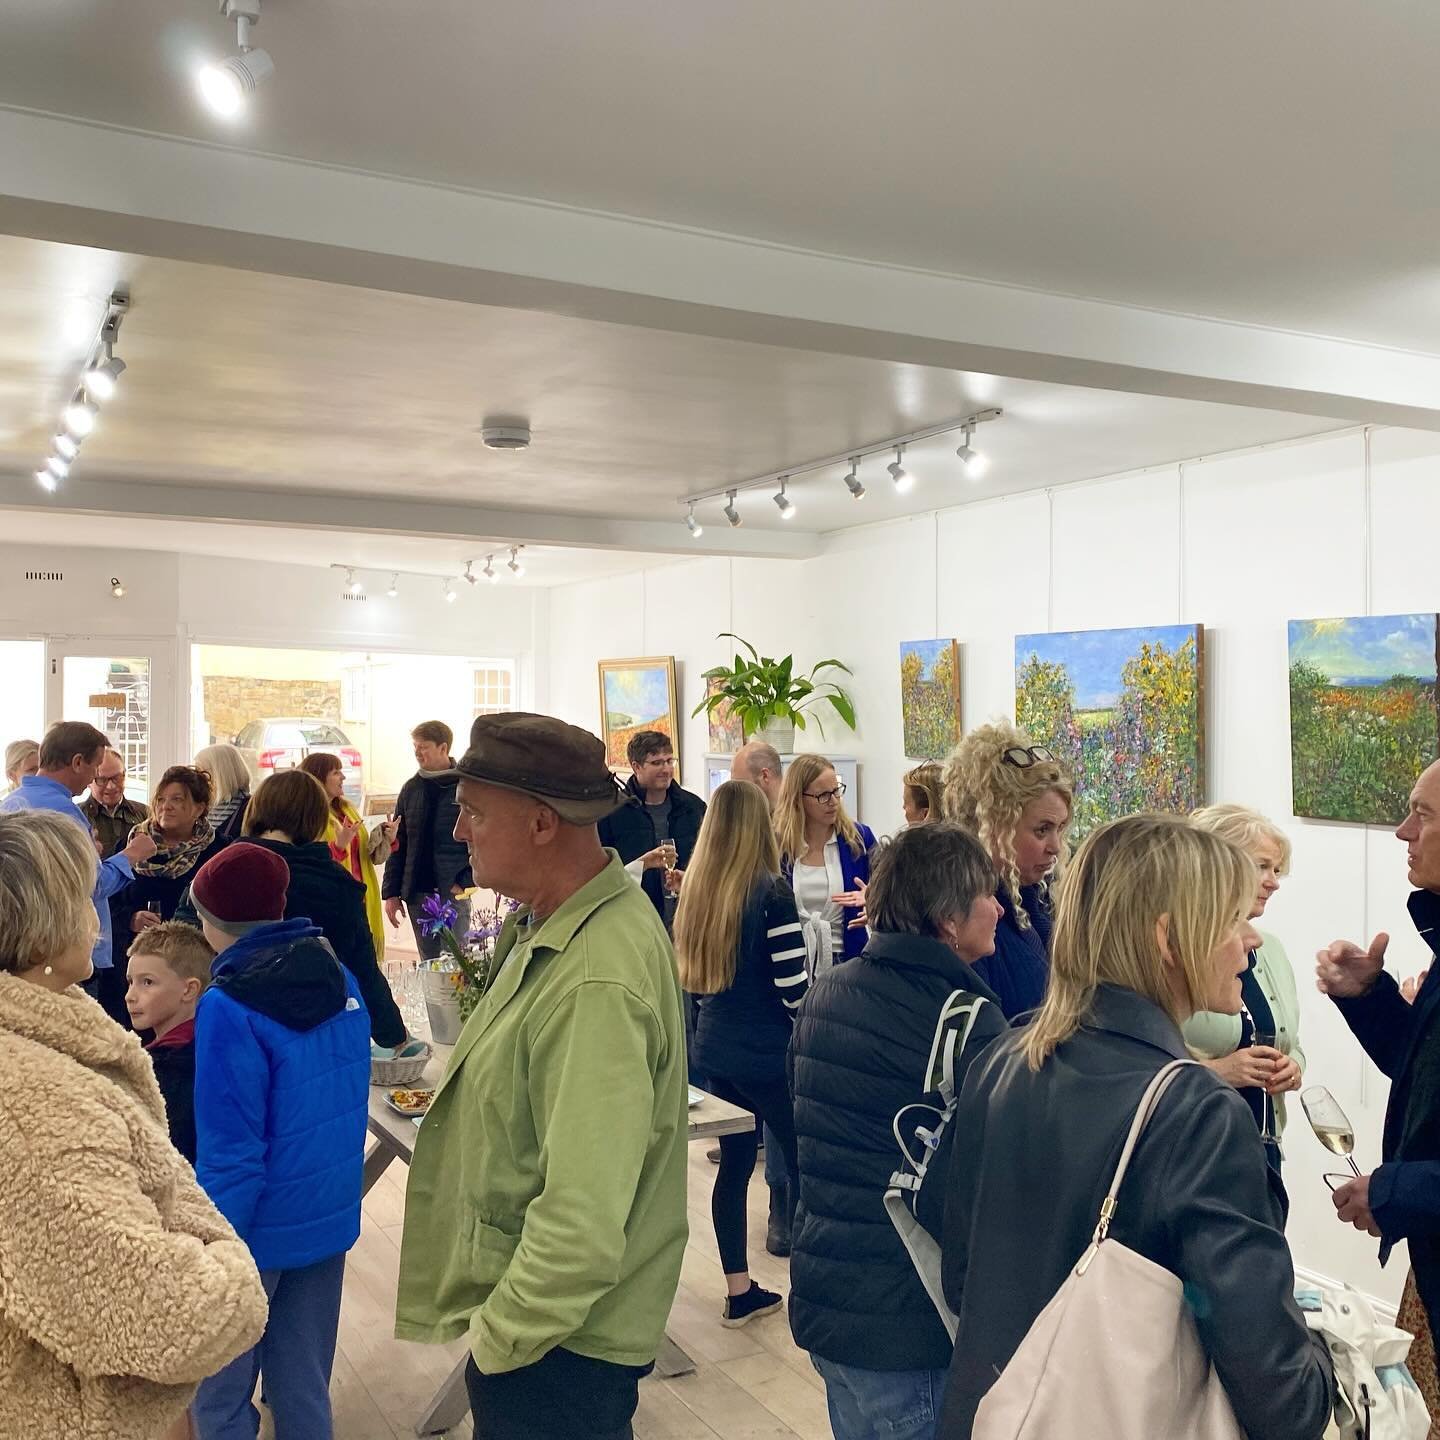 Thank you thank you thank you! 

Such a wonderful show opening on Saturday, we were blown away by the response to this show. Thank you to all who came to the private view, and for those who came from far and wide to see the show over the last few day